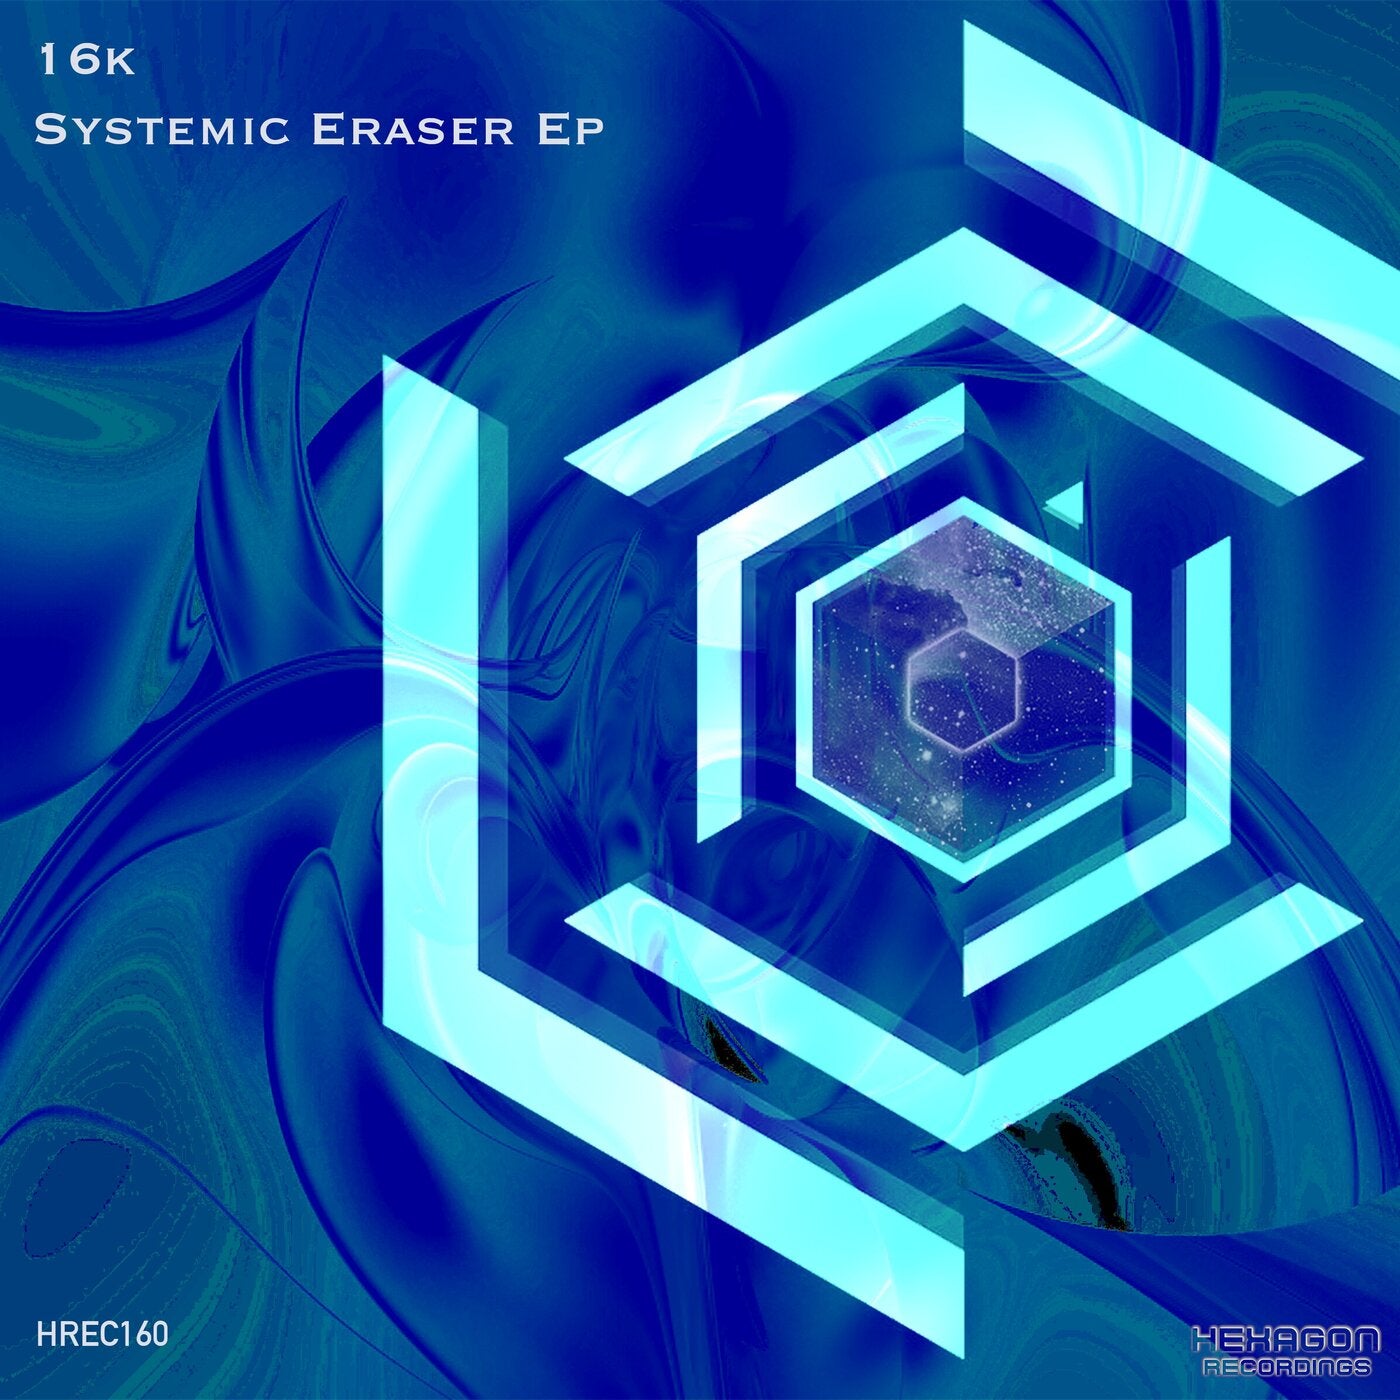 Systemic Eraser Ep